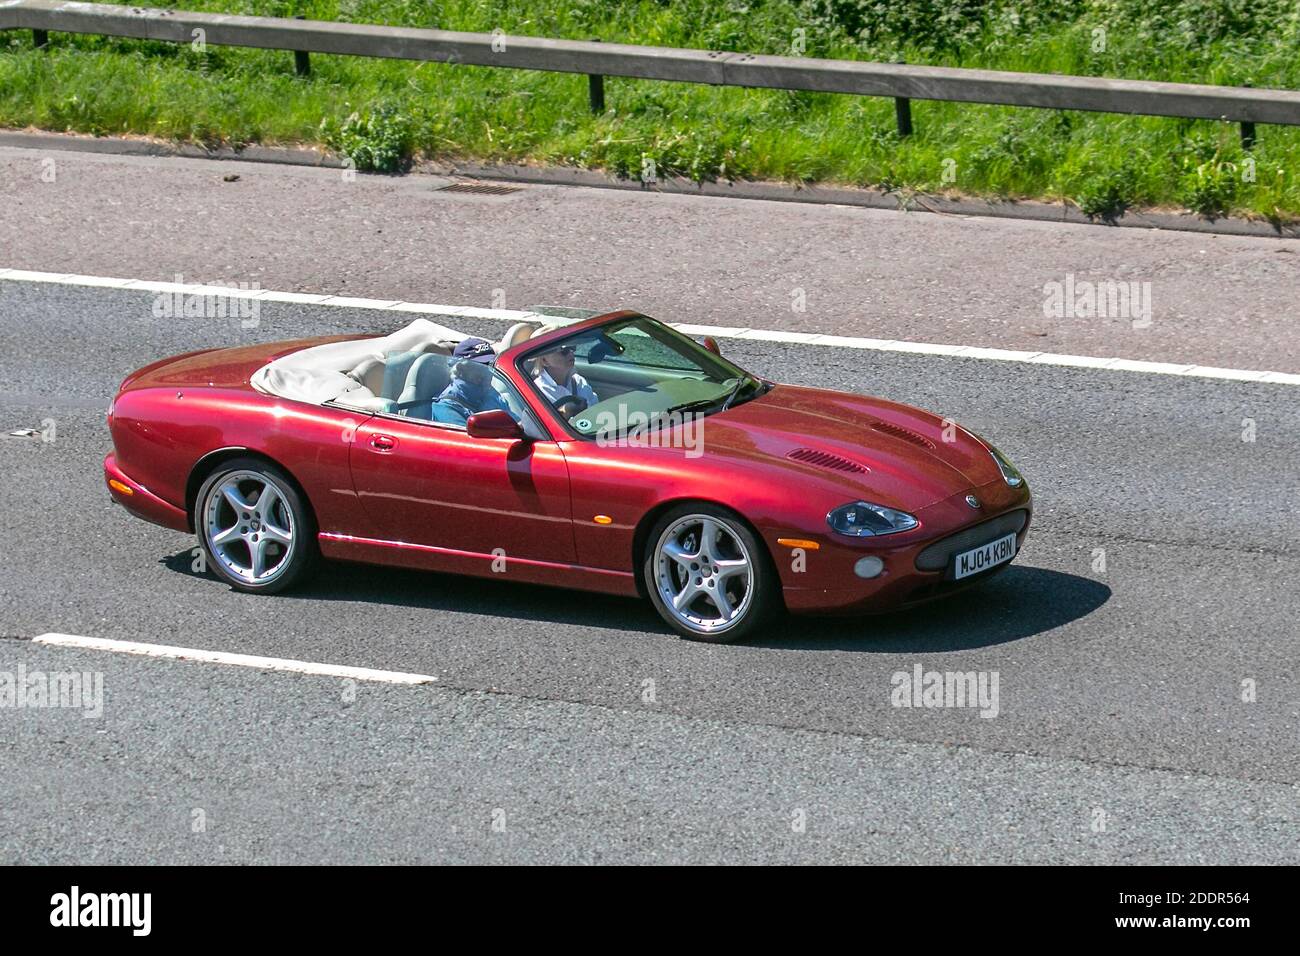 2004 red Jaguar XKR Convertible Auto; Vehicular traffic, moving vehicles, cars, vehicle driving on UK roads, motors, motoring on the M6 motorway highway UK road network. Stock Photo